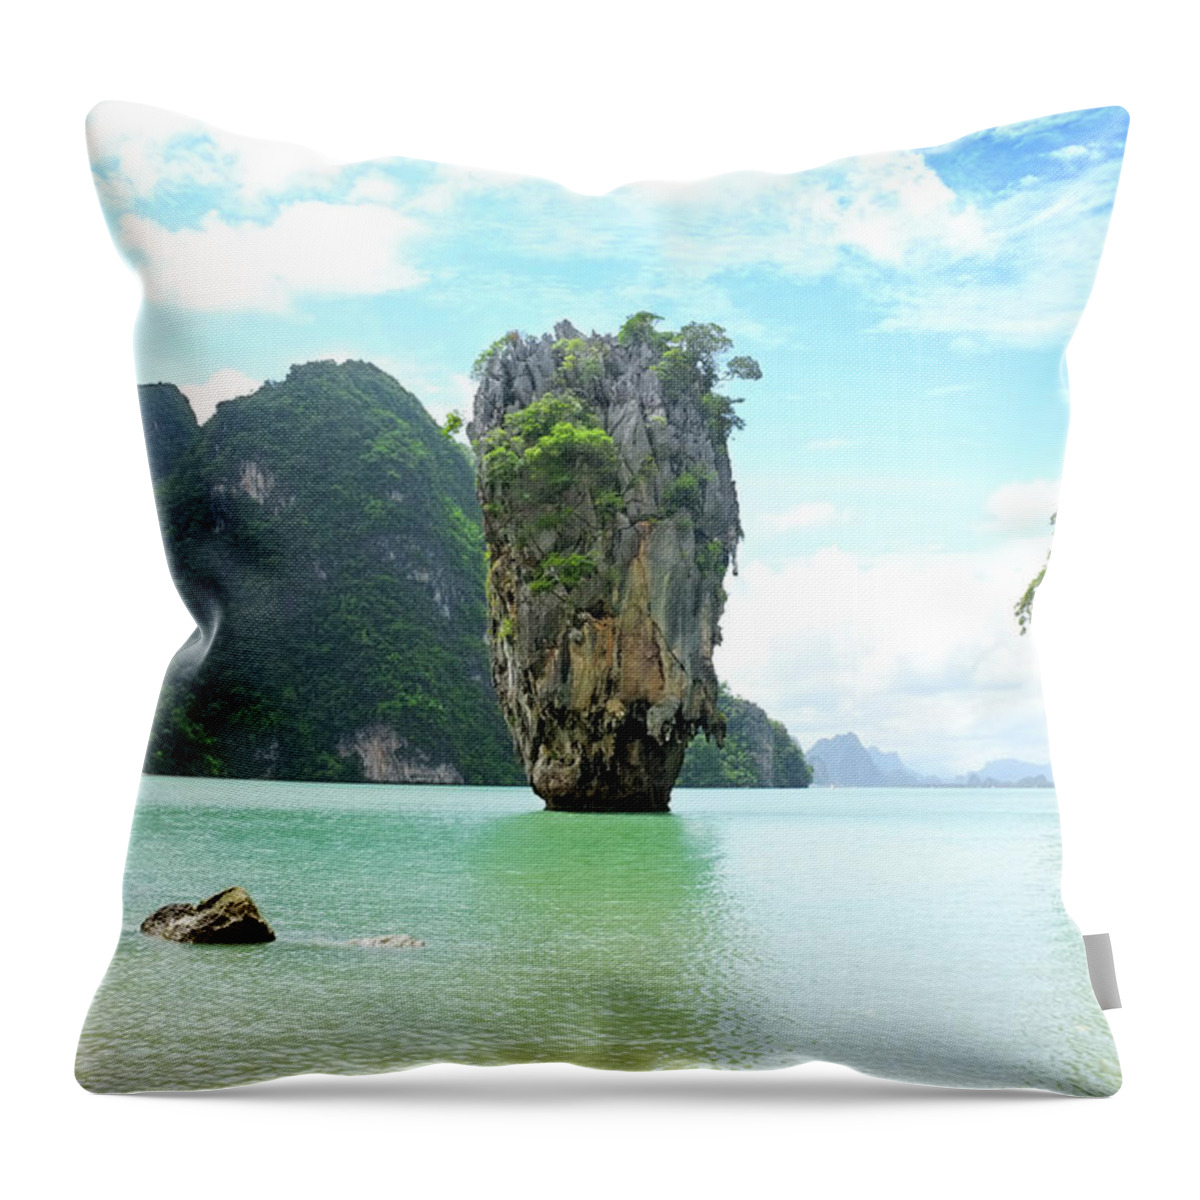 Phang-nga Province Throw Pillow featuring the photograph Phuket, Thailand by Fourseasons